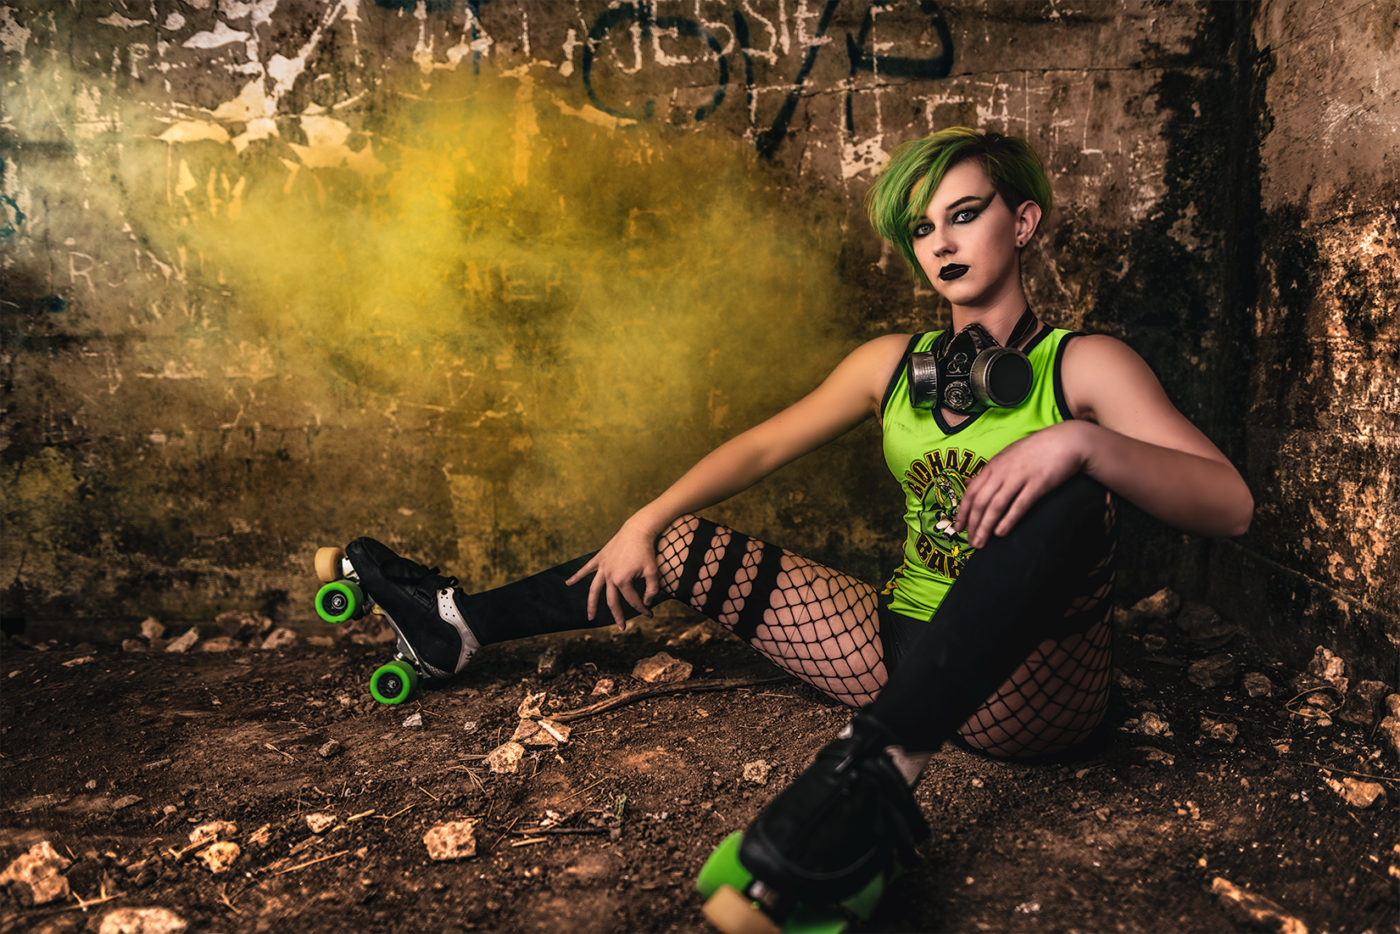 A girl in green roller skates sitting on a dirt floor captured by Houston Photographer, Chris Spicks Photography.